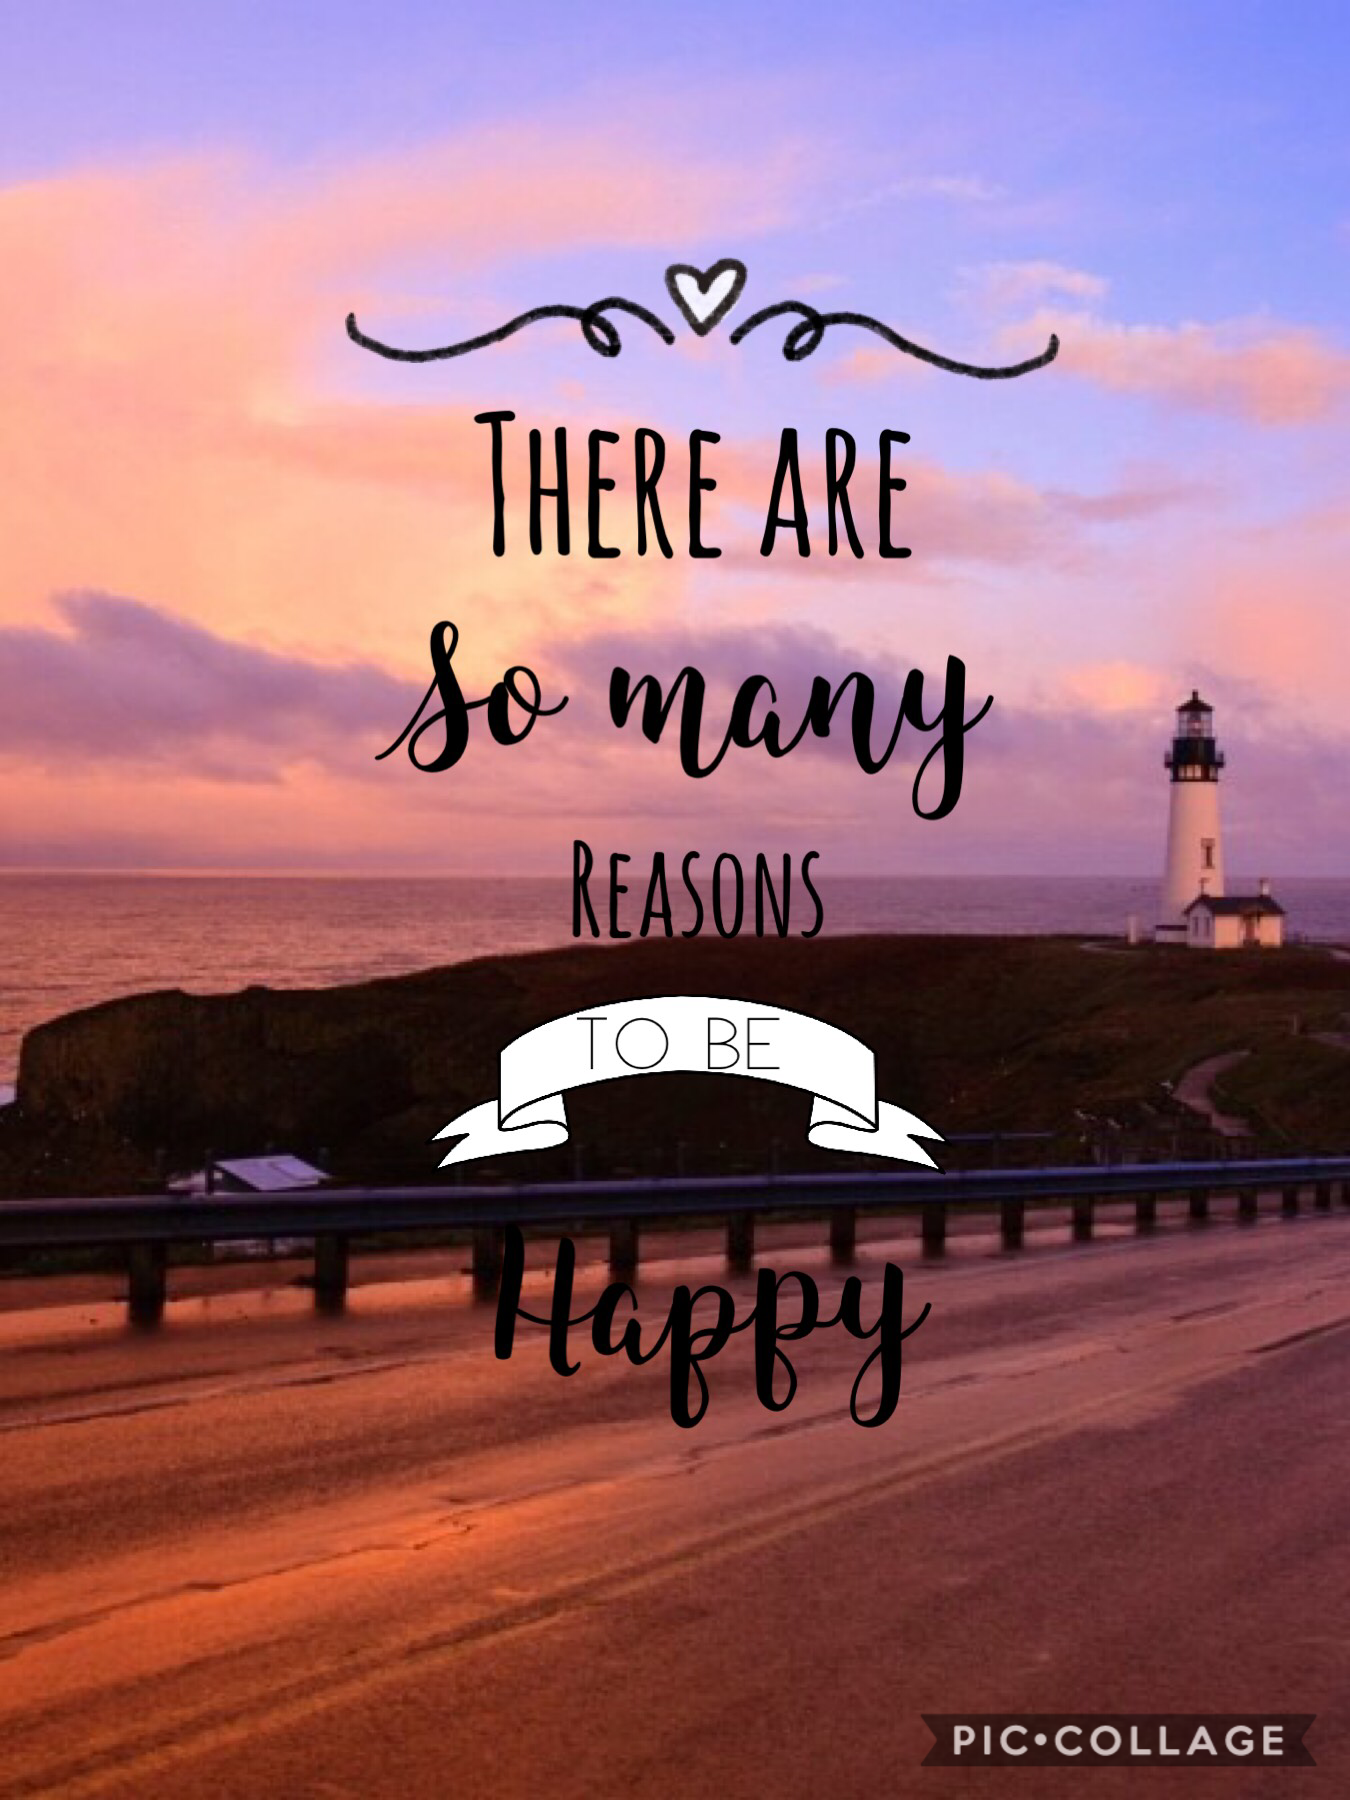 There are so many reasons to be happy😊